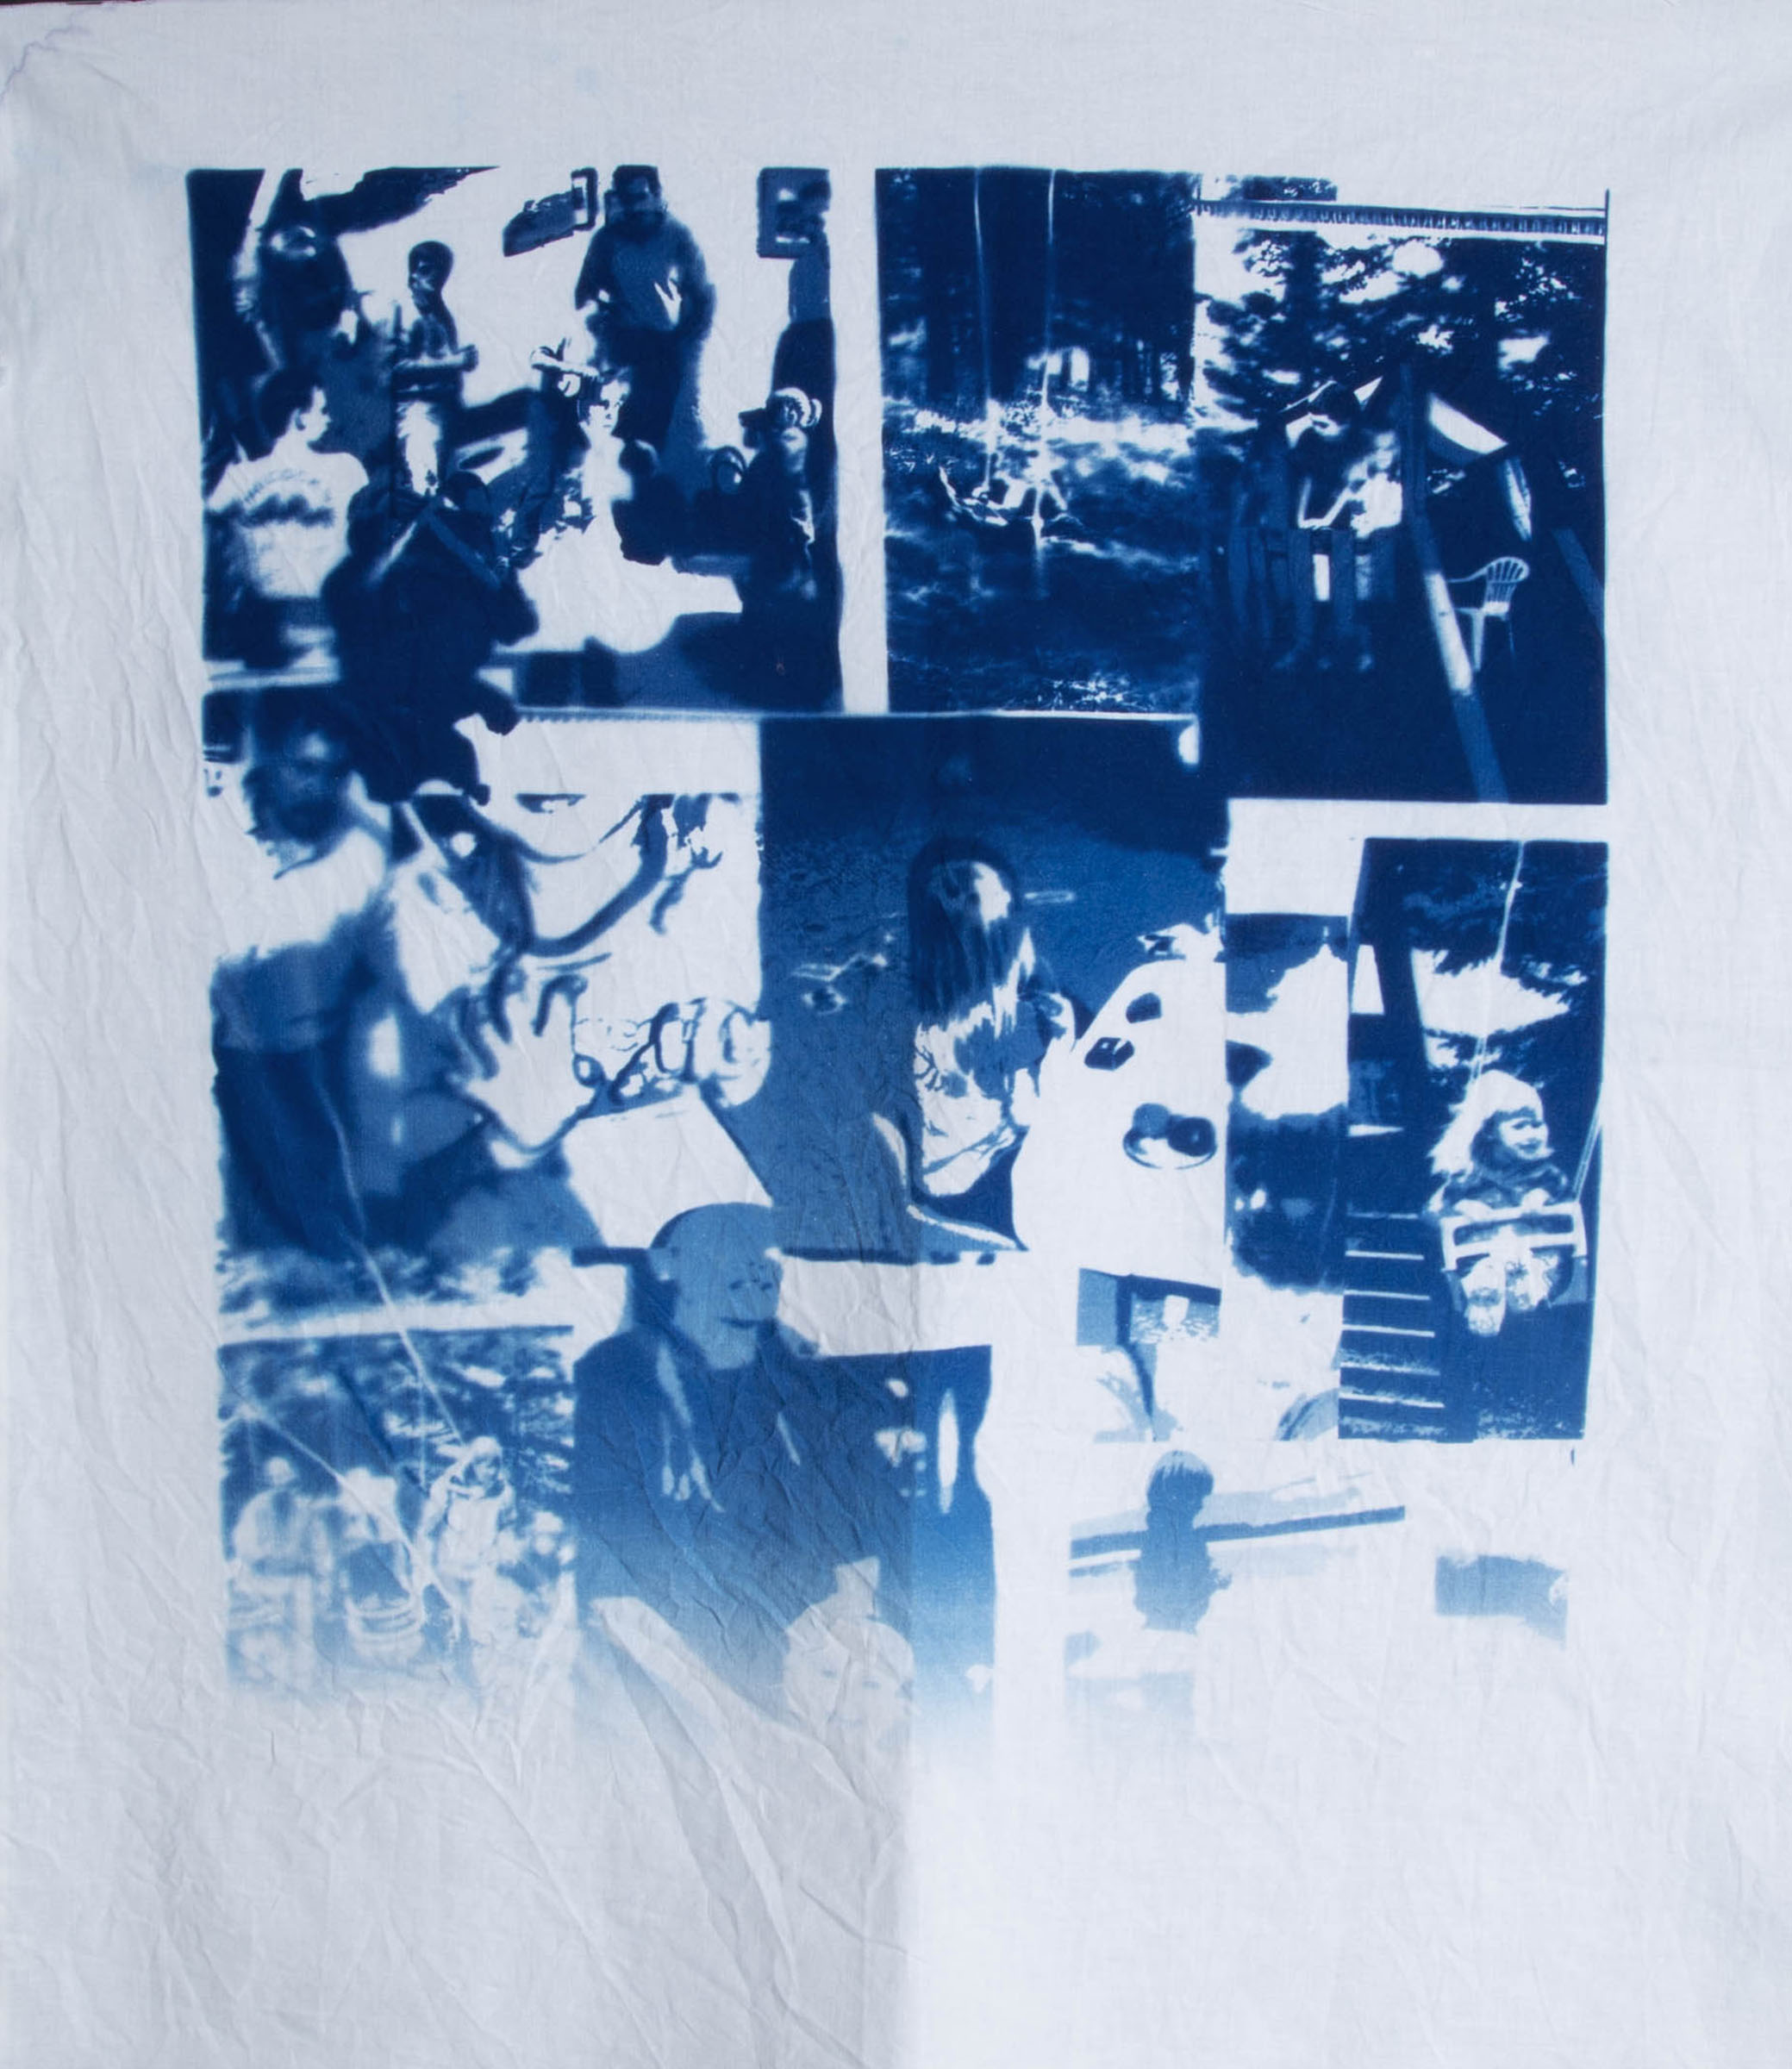 Cyanotype on fabric print of collaged childhood photographs